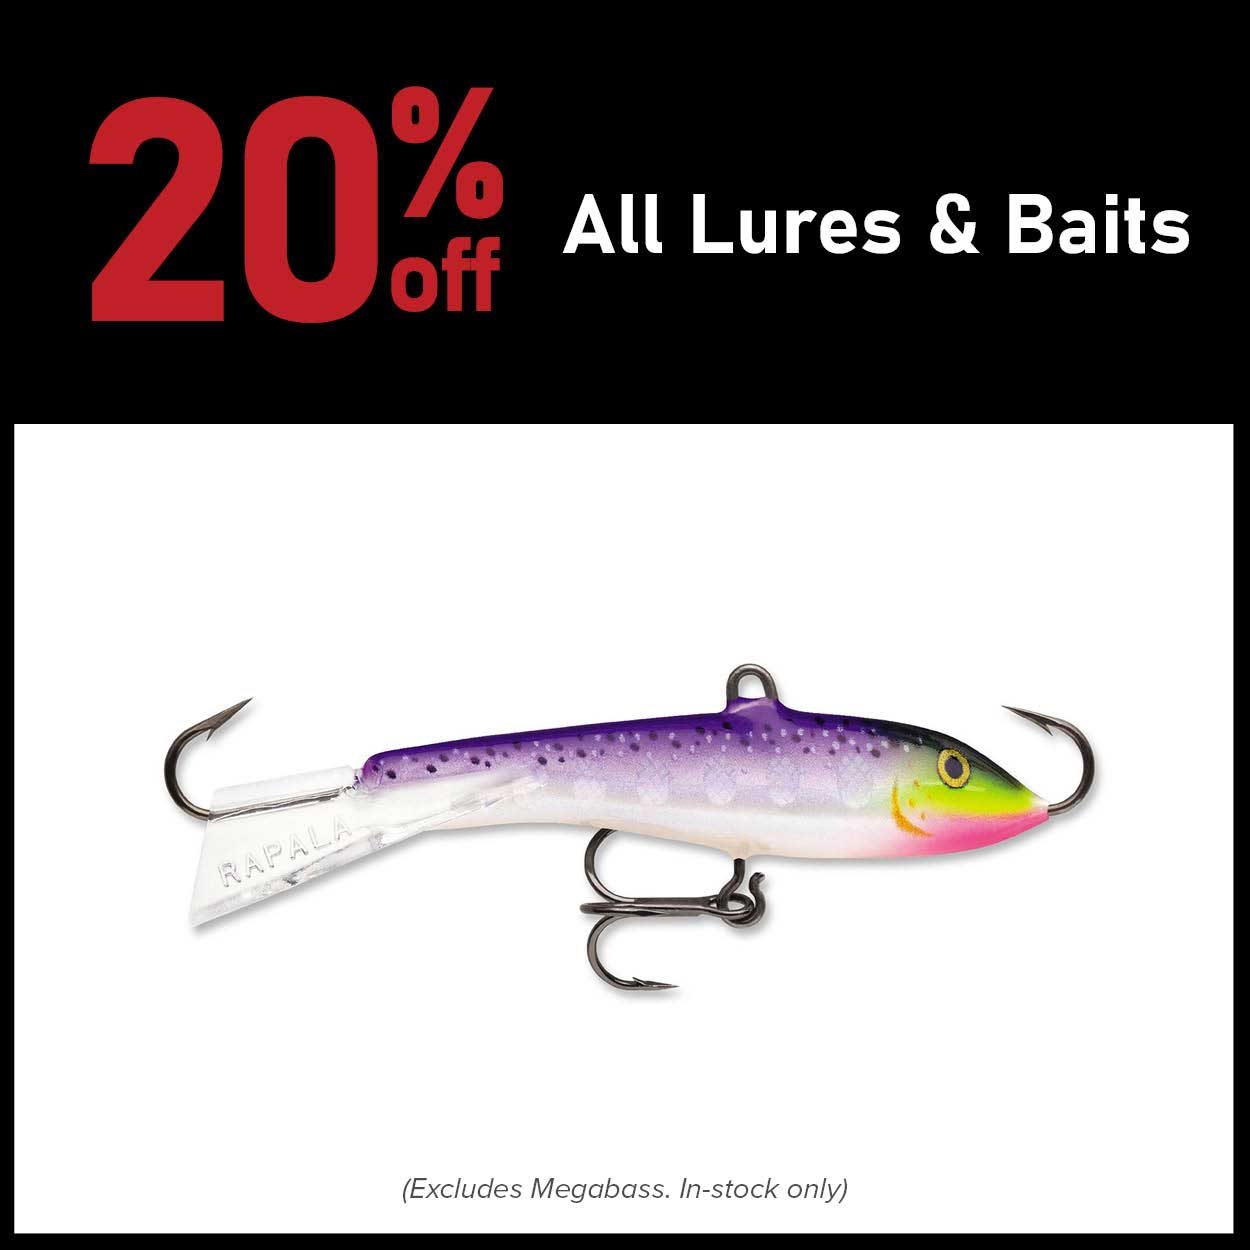 20% Off All Lures & Baits (Excludes Megabass. In-stock only)